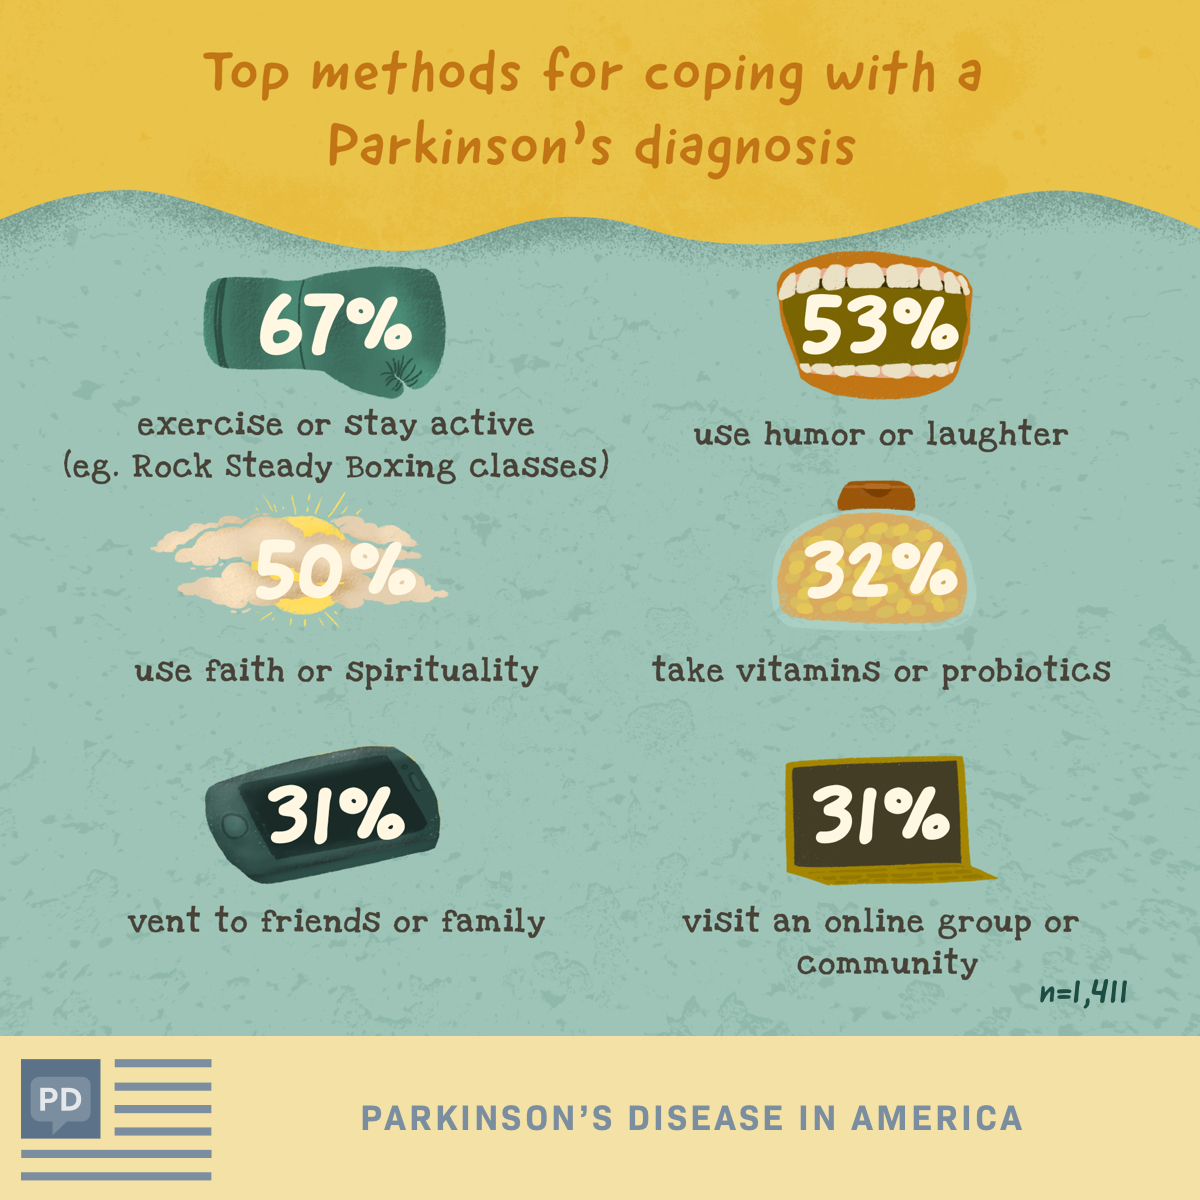 Top methods for coping with a Parkinson’s disease diagnosis